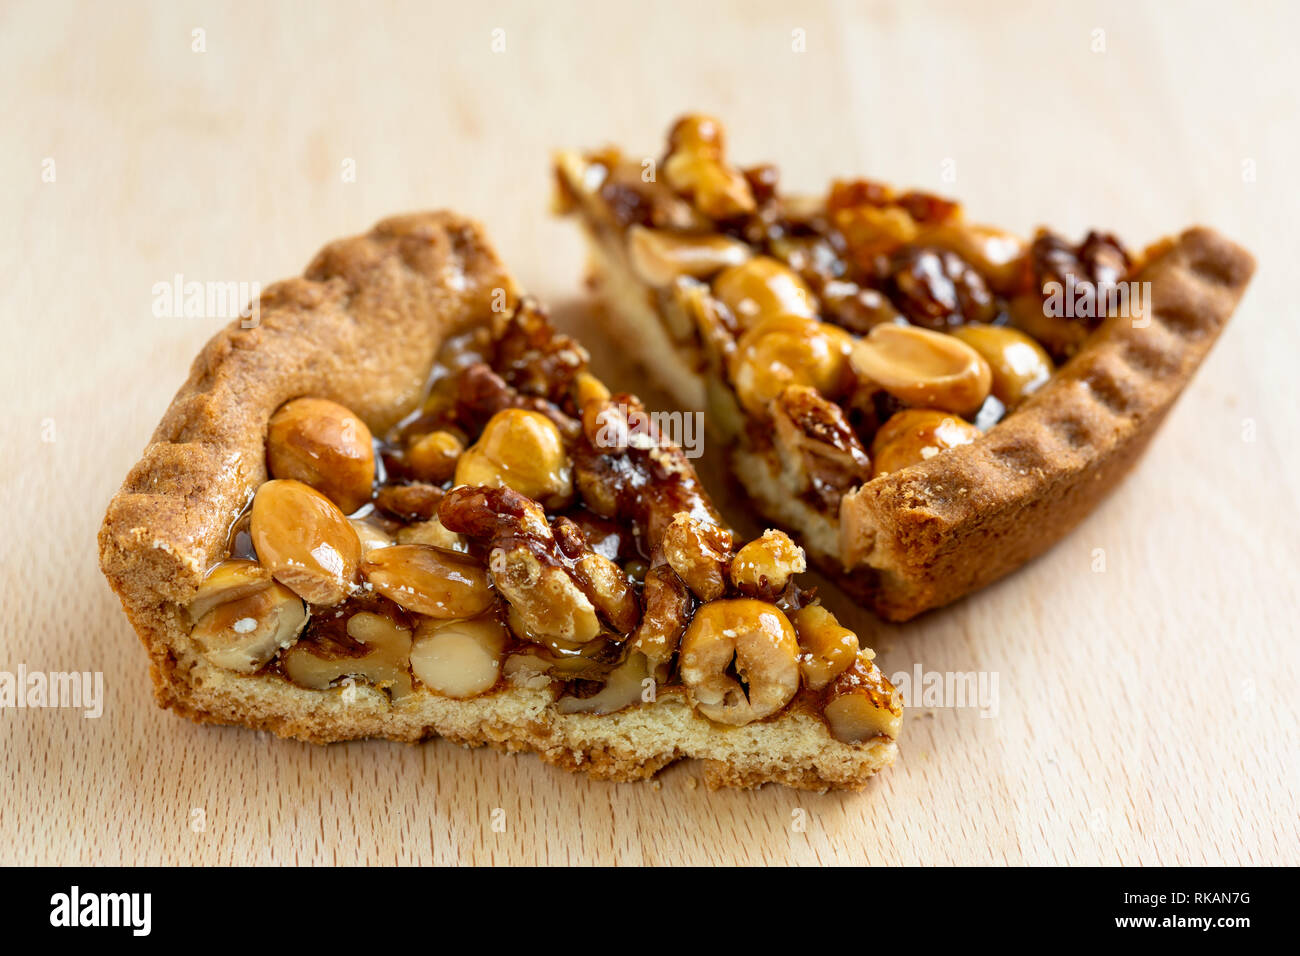 Two slices of tart with nuts Stock Photo